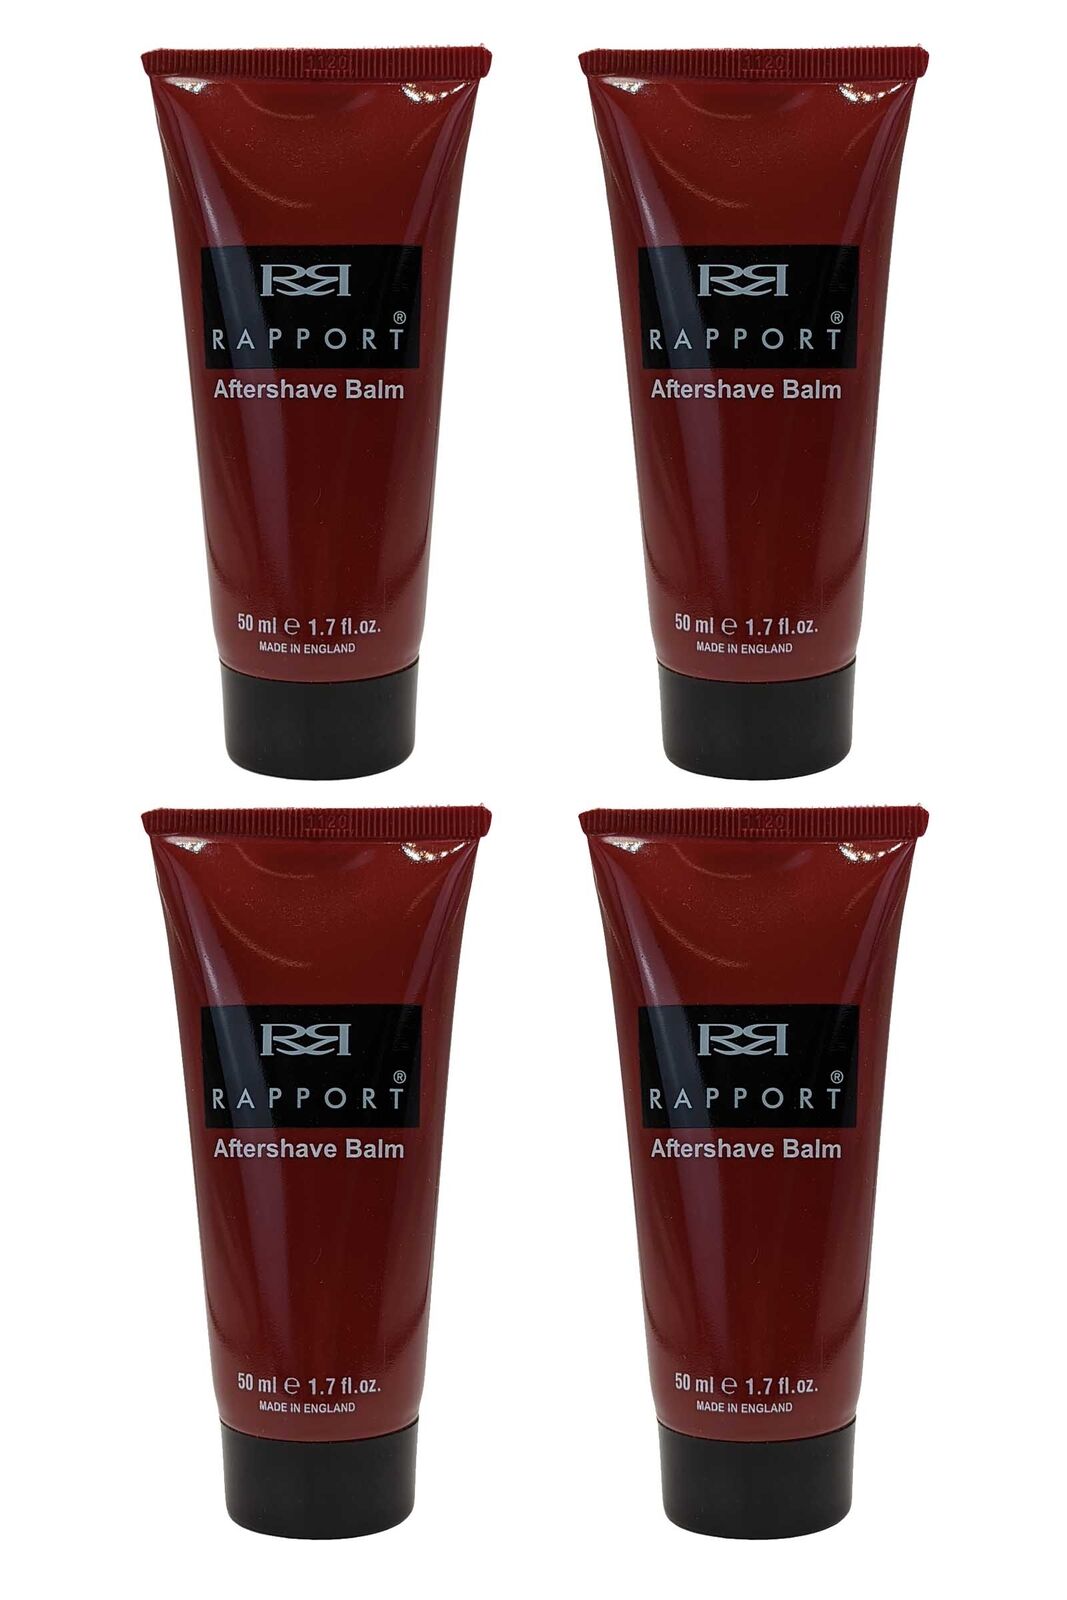 Rapport After Shave Balm 50ml x 4 (200ml equivalent) Men's Aftershave